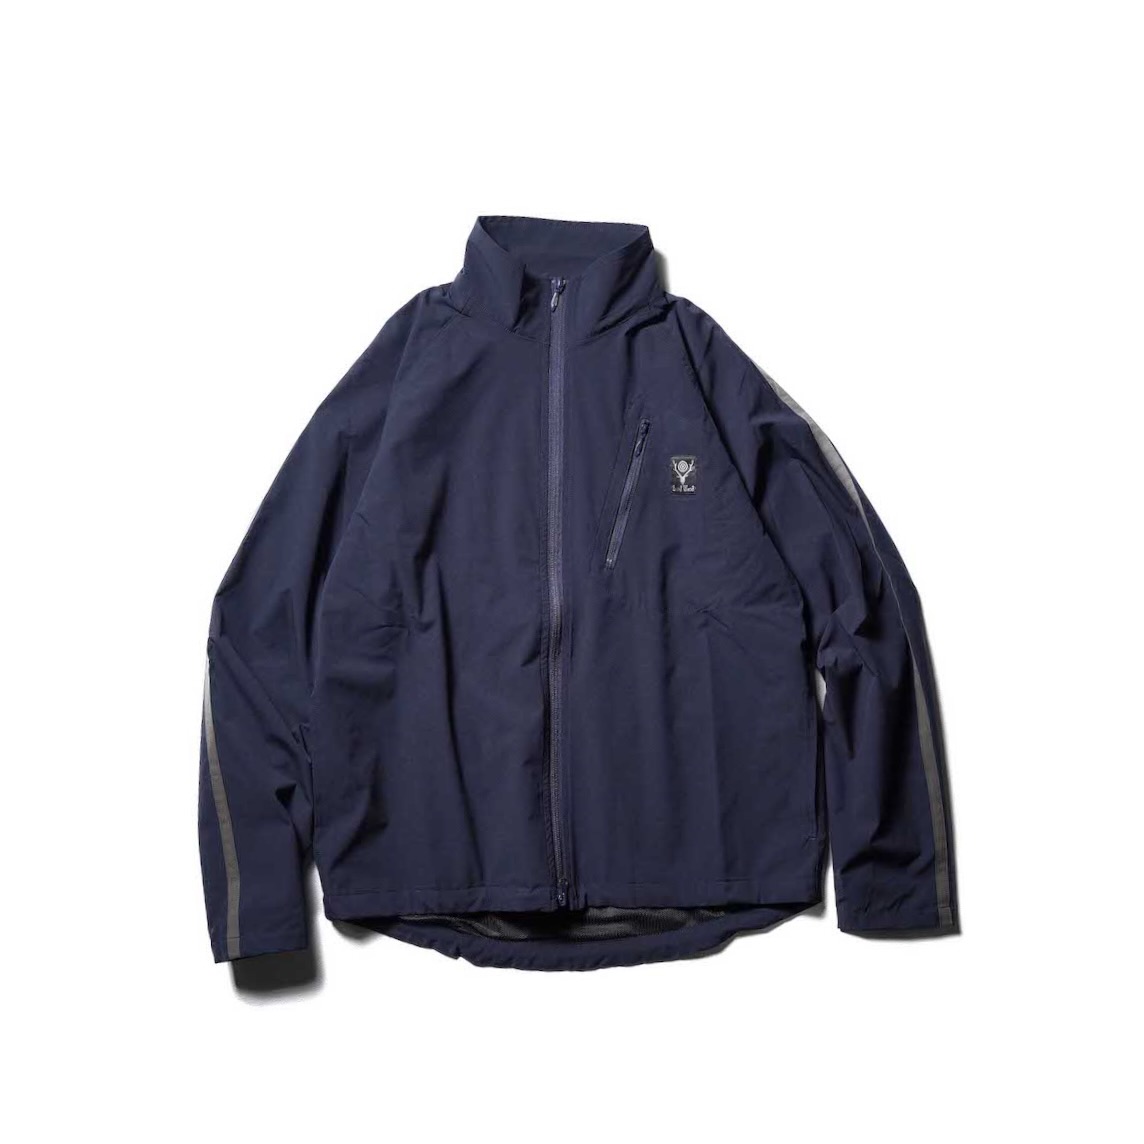 South2 West8 / L/S S.L.Zipped Trail Shirt - Poly Ripstop (Navy)